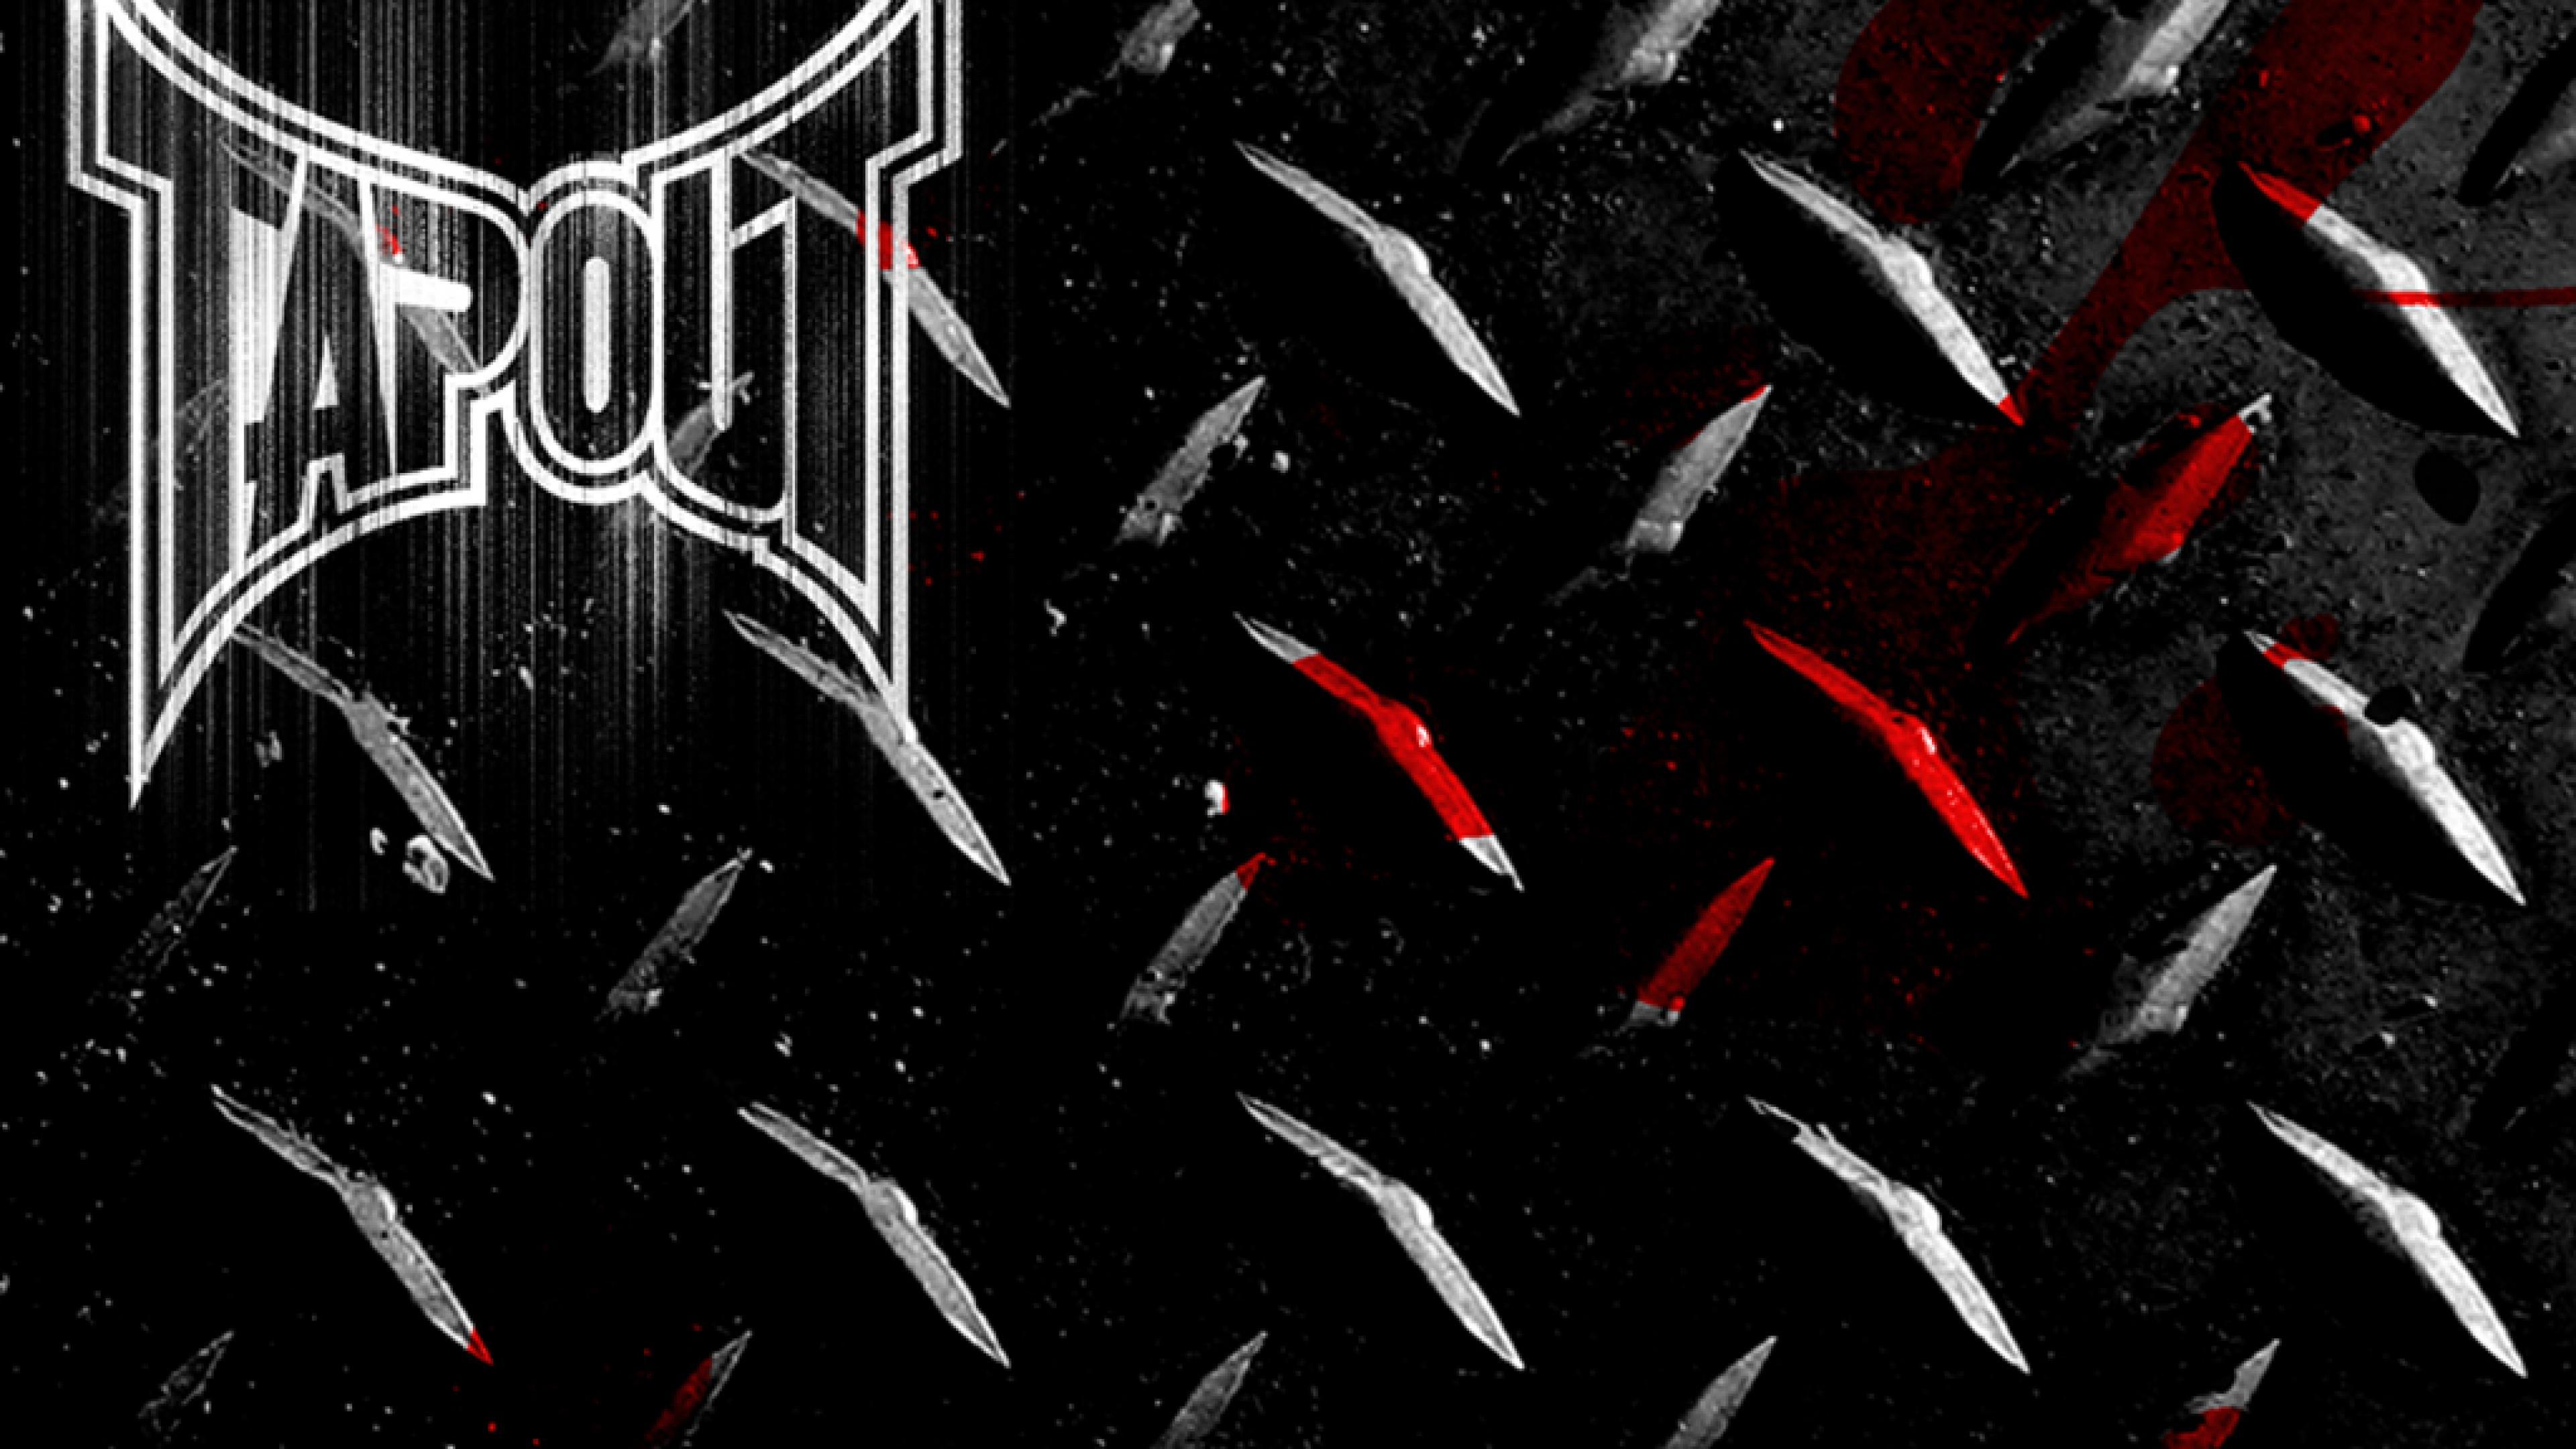 Tapout Background